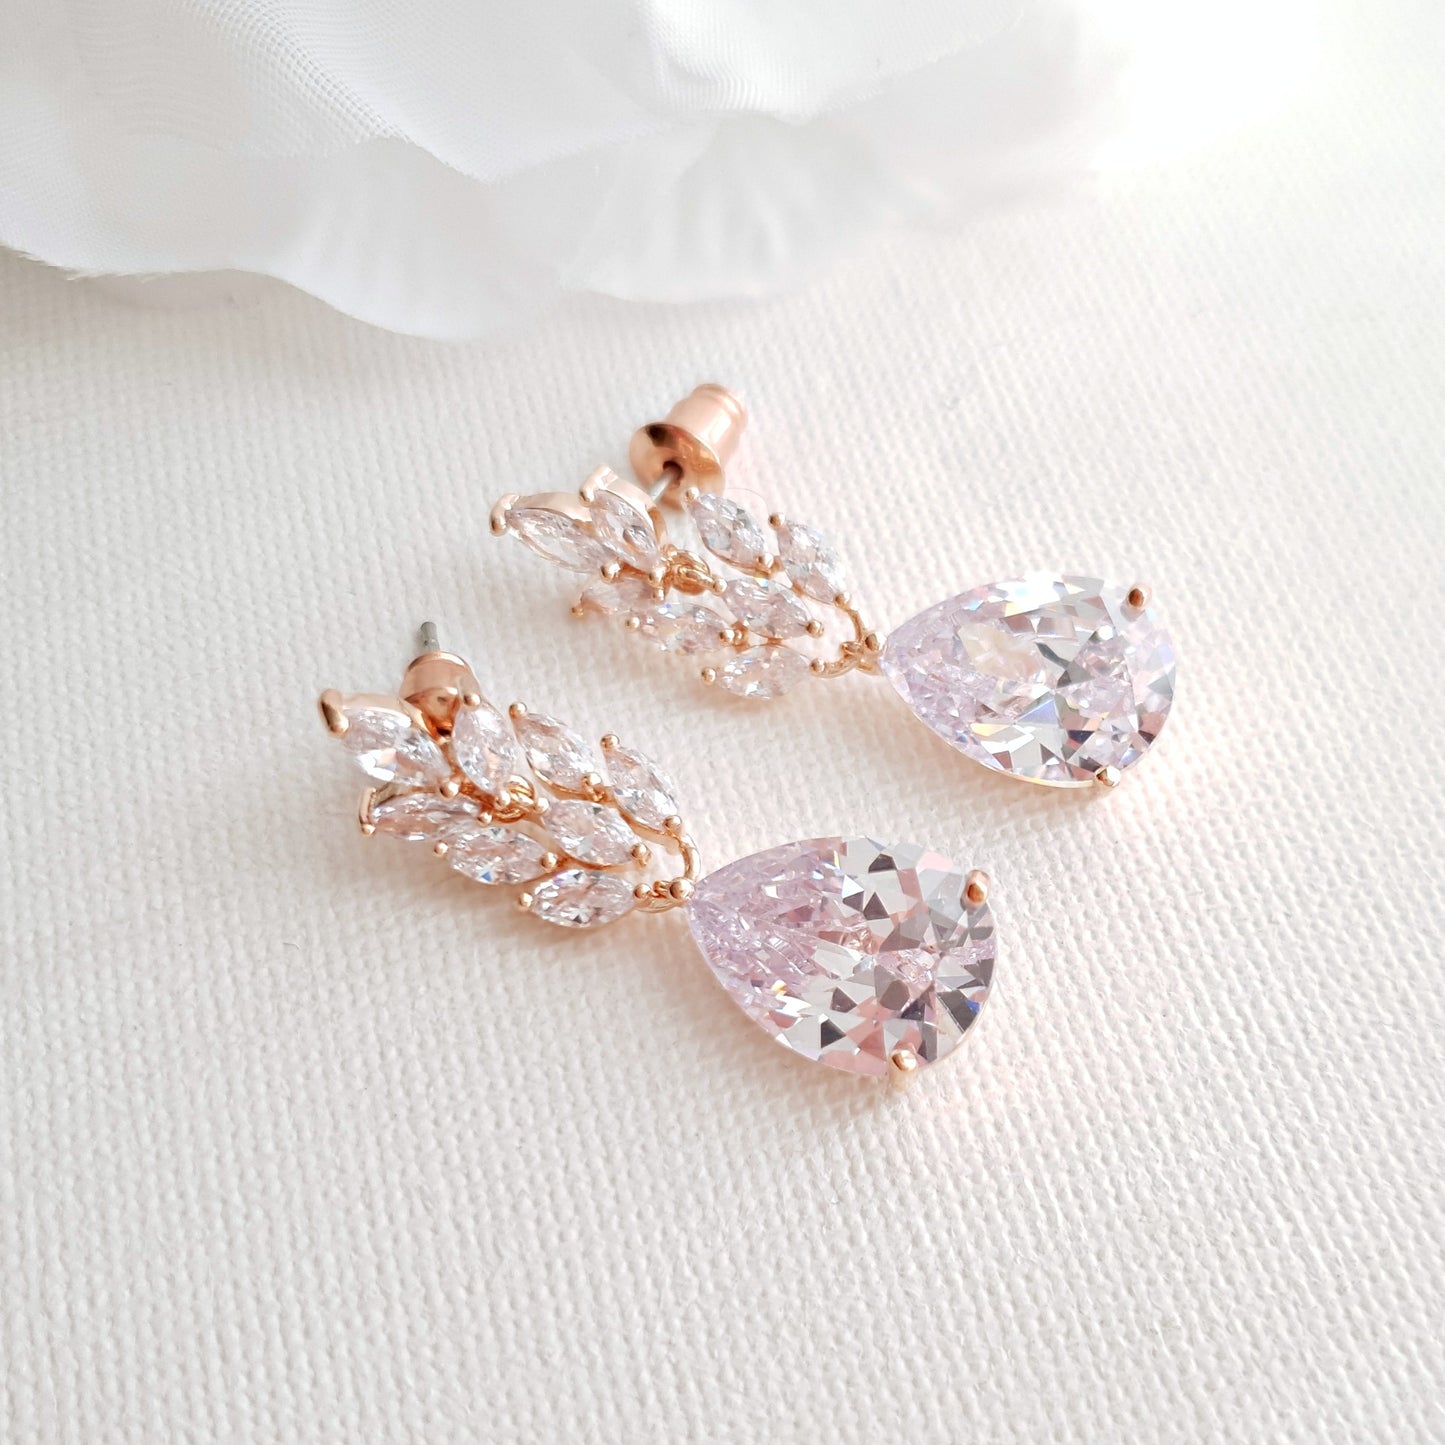 Rose Gold Leaf Necklace Earrings Wedding Set- Willow